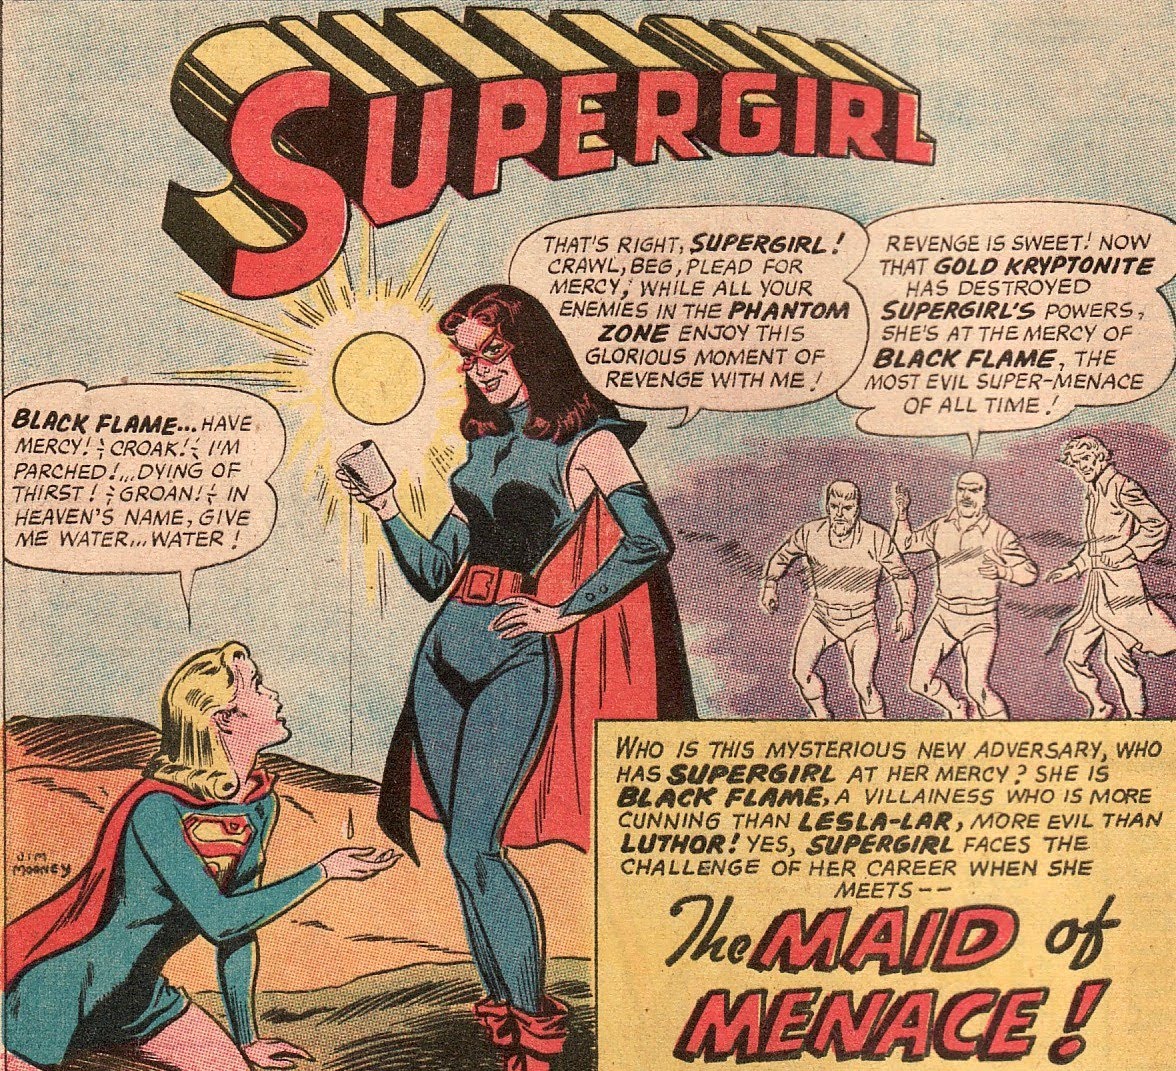 During the 60s, Supergirl's most notable artist was Jim Mooney, who very much defined the look of Kara and her strips. After Lesla-Lar's ignomious death she also fought villains like the Black Flame, though none stuck around like Superman's foes did.